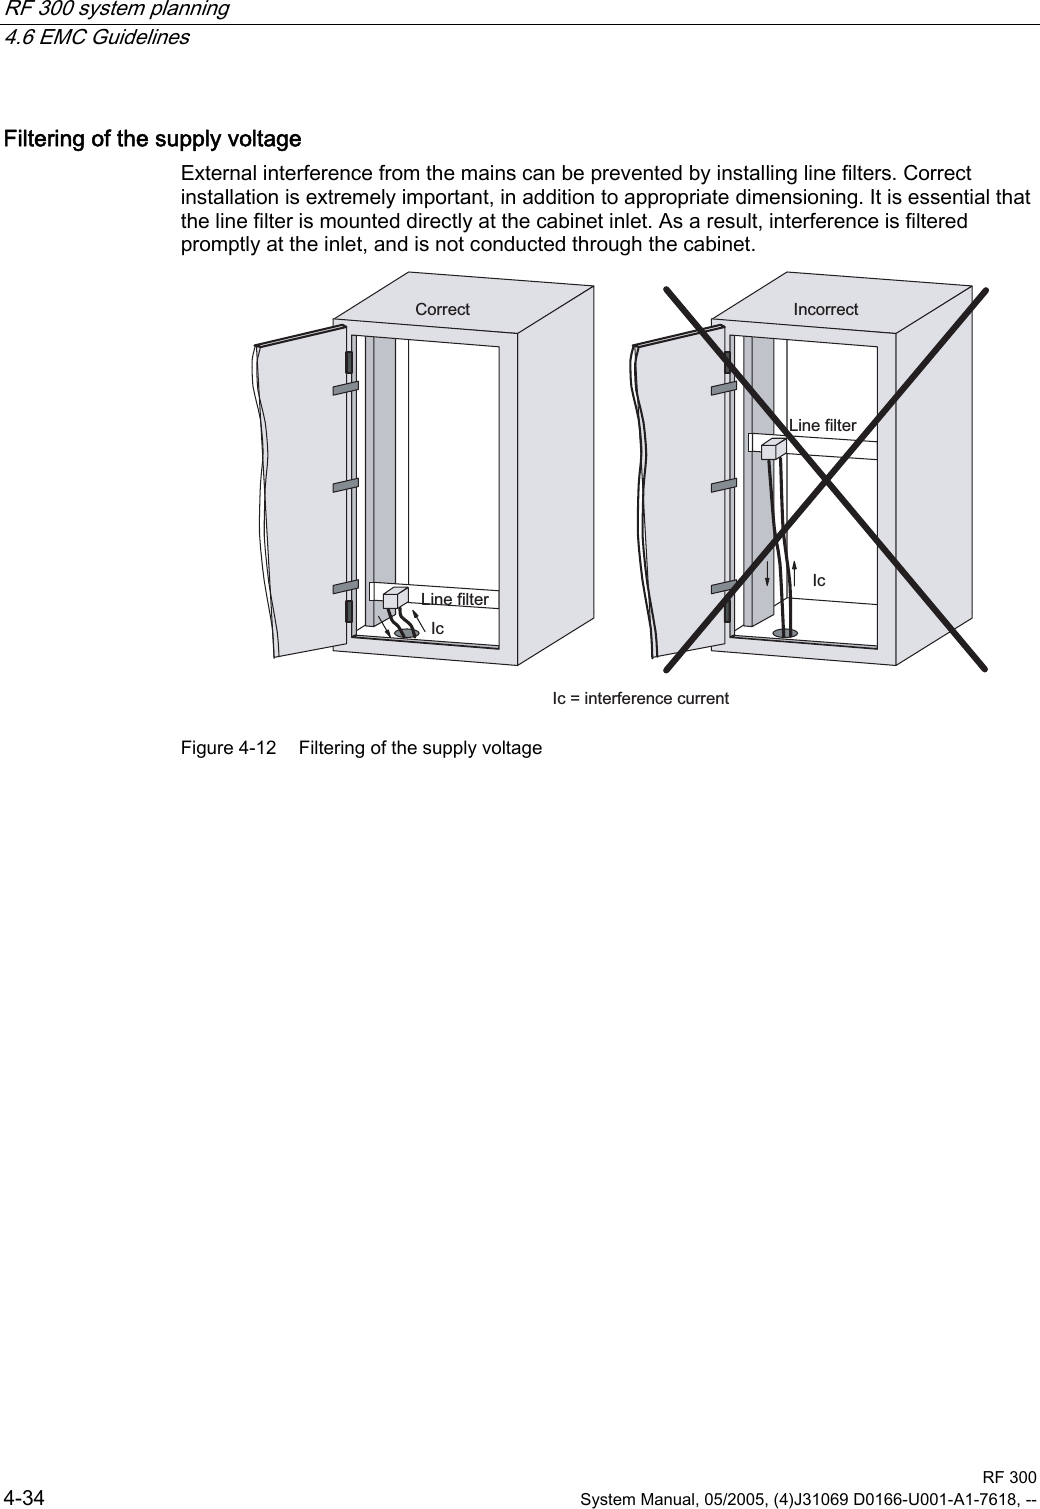 RF 300 system planning   4.6 EMC Guidelines  RF 300 4-34  System Manual, 05/2005, (4)J31069 D0166-U001-A1-7618, -- Filtering of the supply voltage External interference from the mains can be prevented by installing line filters. Correct installation is extremely important, in addition to appropriate dimensioning. It is essential that the line filter is mounted directly at the cabinet inlet. As a result, interference is filtered promptly at the inlet, and is not conducted through the cabinet. /LQHILOWHU,F&amp;RUUHFW/LQHILOWHU,QFRUUHFW,F LQWHUIHUHQFHFXUUHQW,F Figure 4-12  Filtering of the supply voltage  